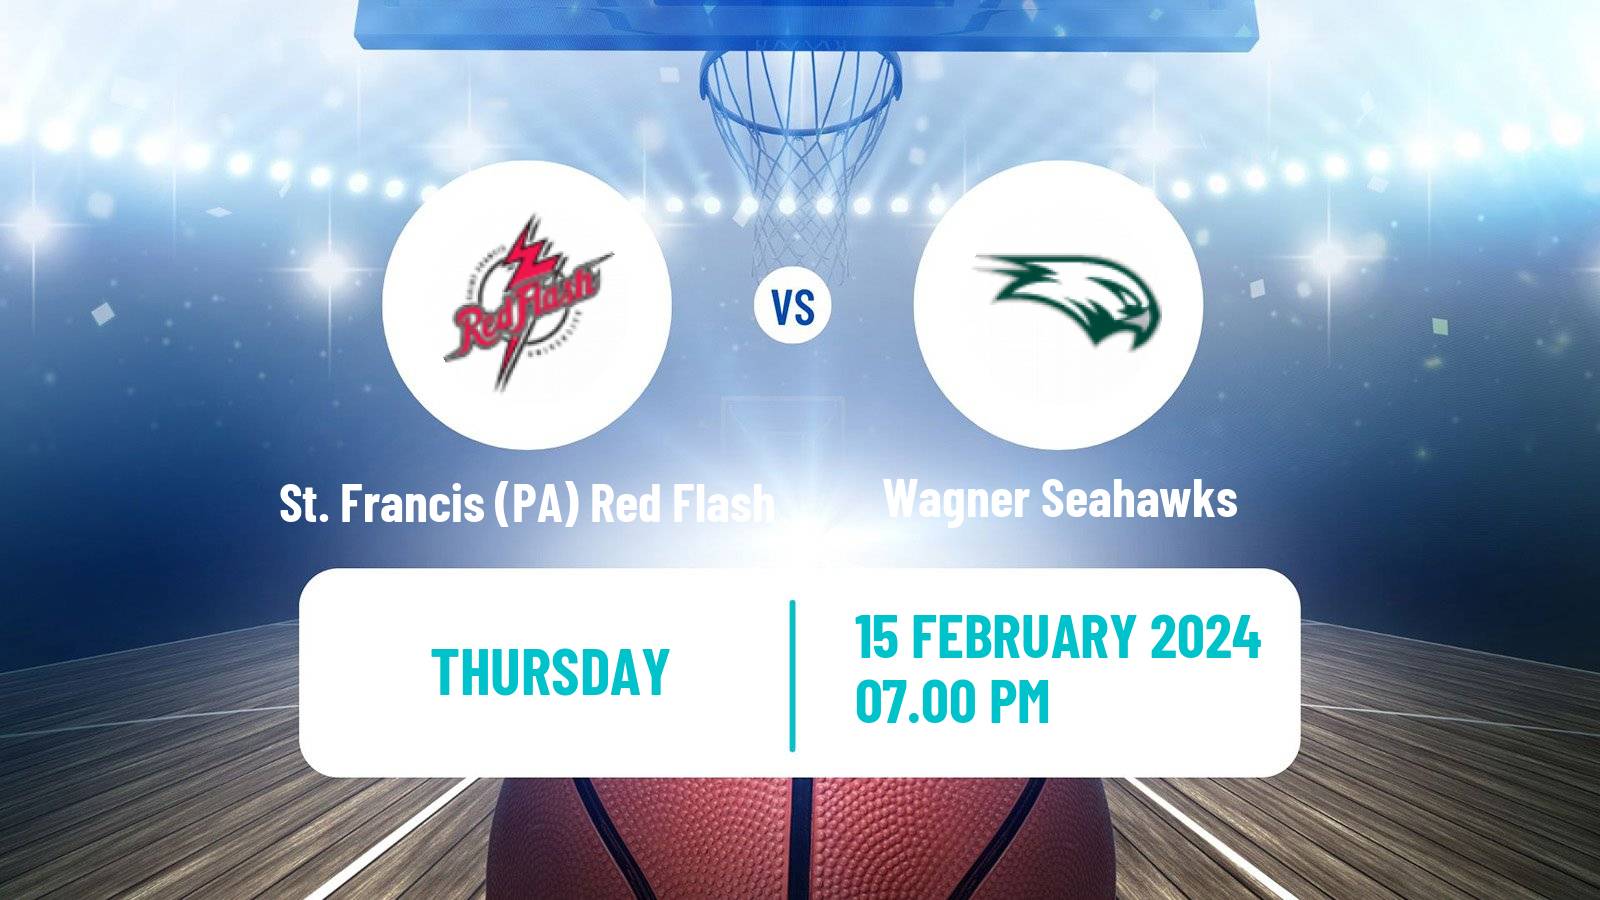 Basketball NCAA College Basketball St. Francis (PA) Red Flash - Wagner Seahawks